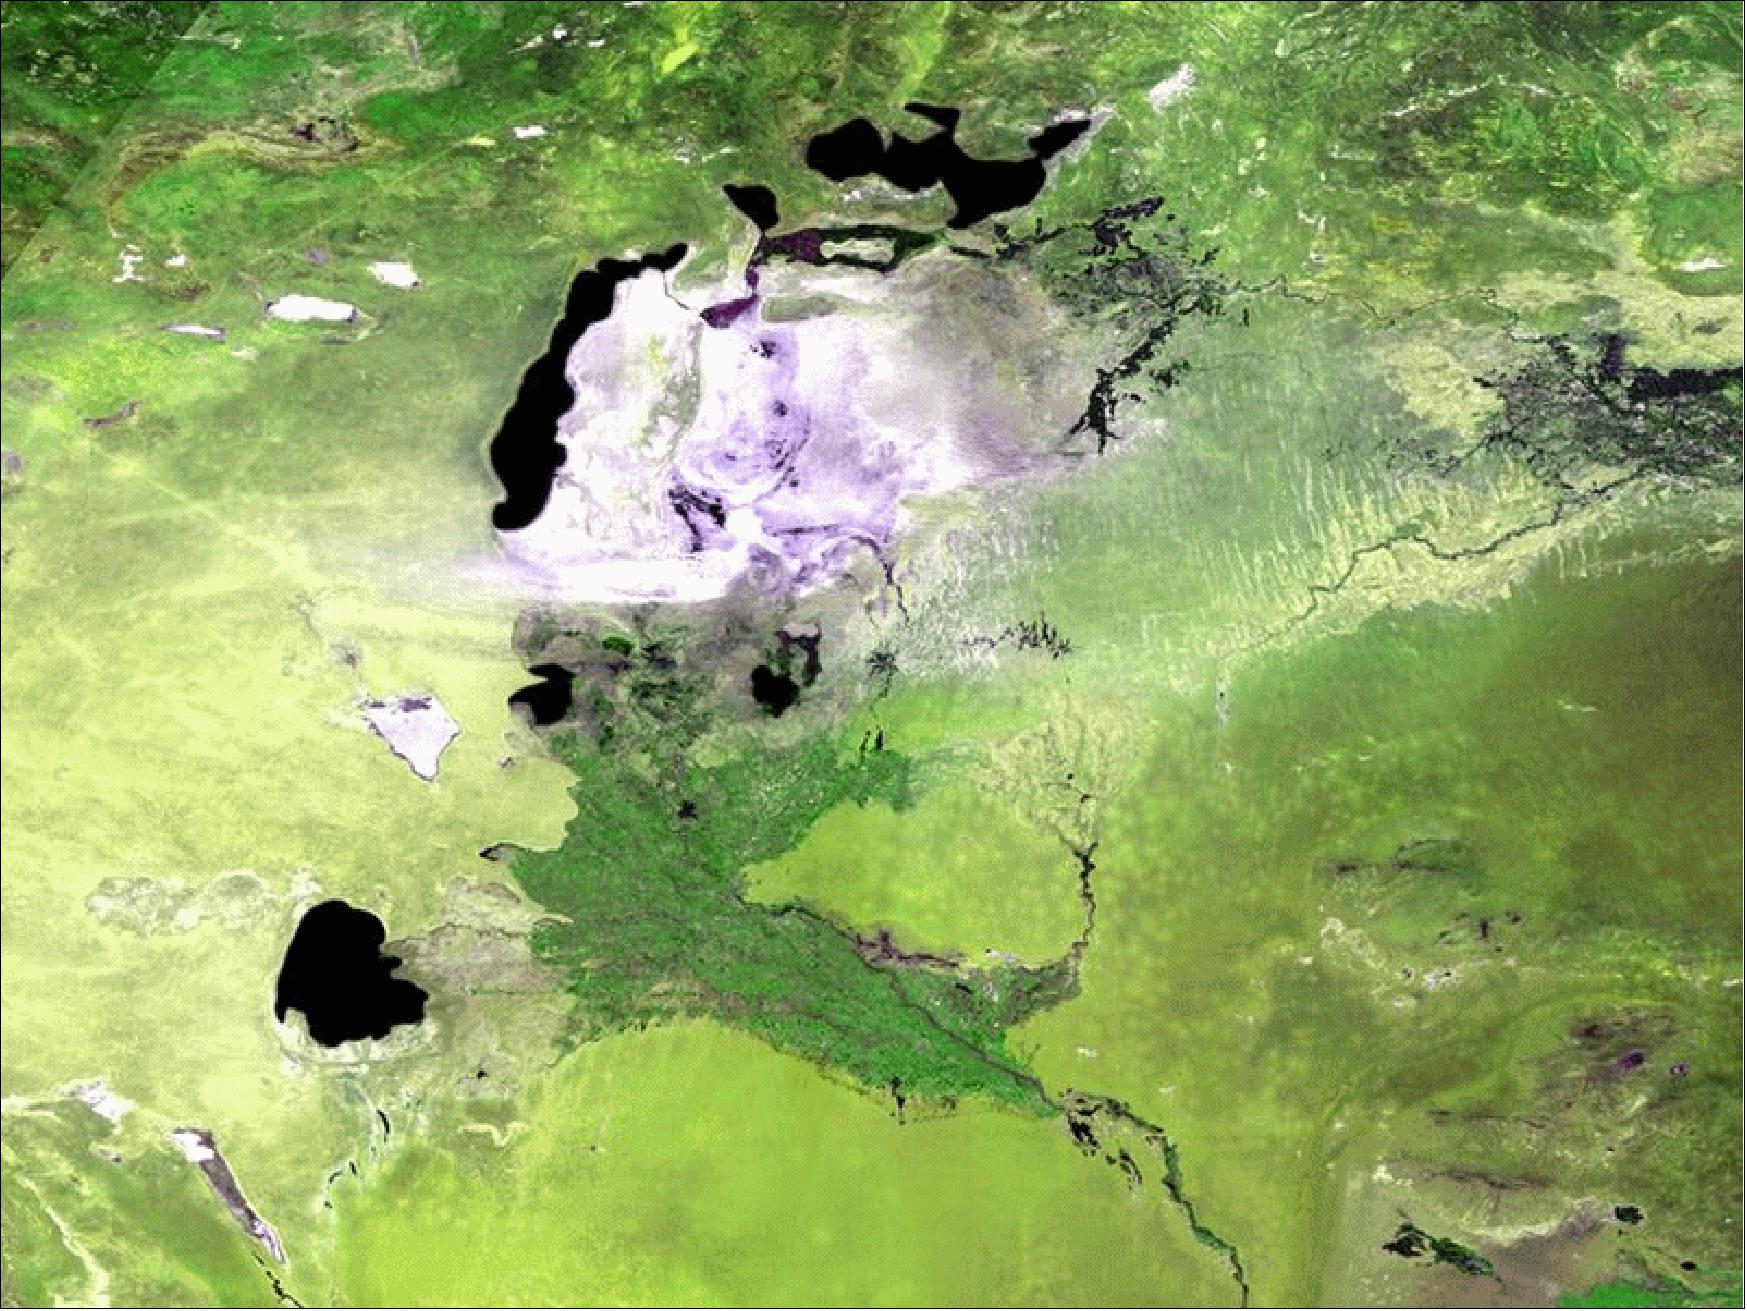 Figure 59: Central Asia's receding Aral Sea, acquired by ESA's PROBA-V minisatellite on May 13, 2013 at a resolution of 300 m (image credit: ESA, VITO) 81)